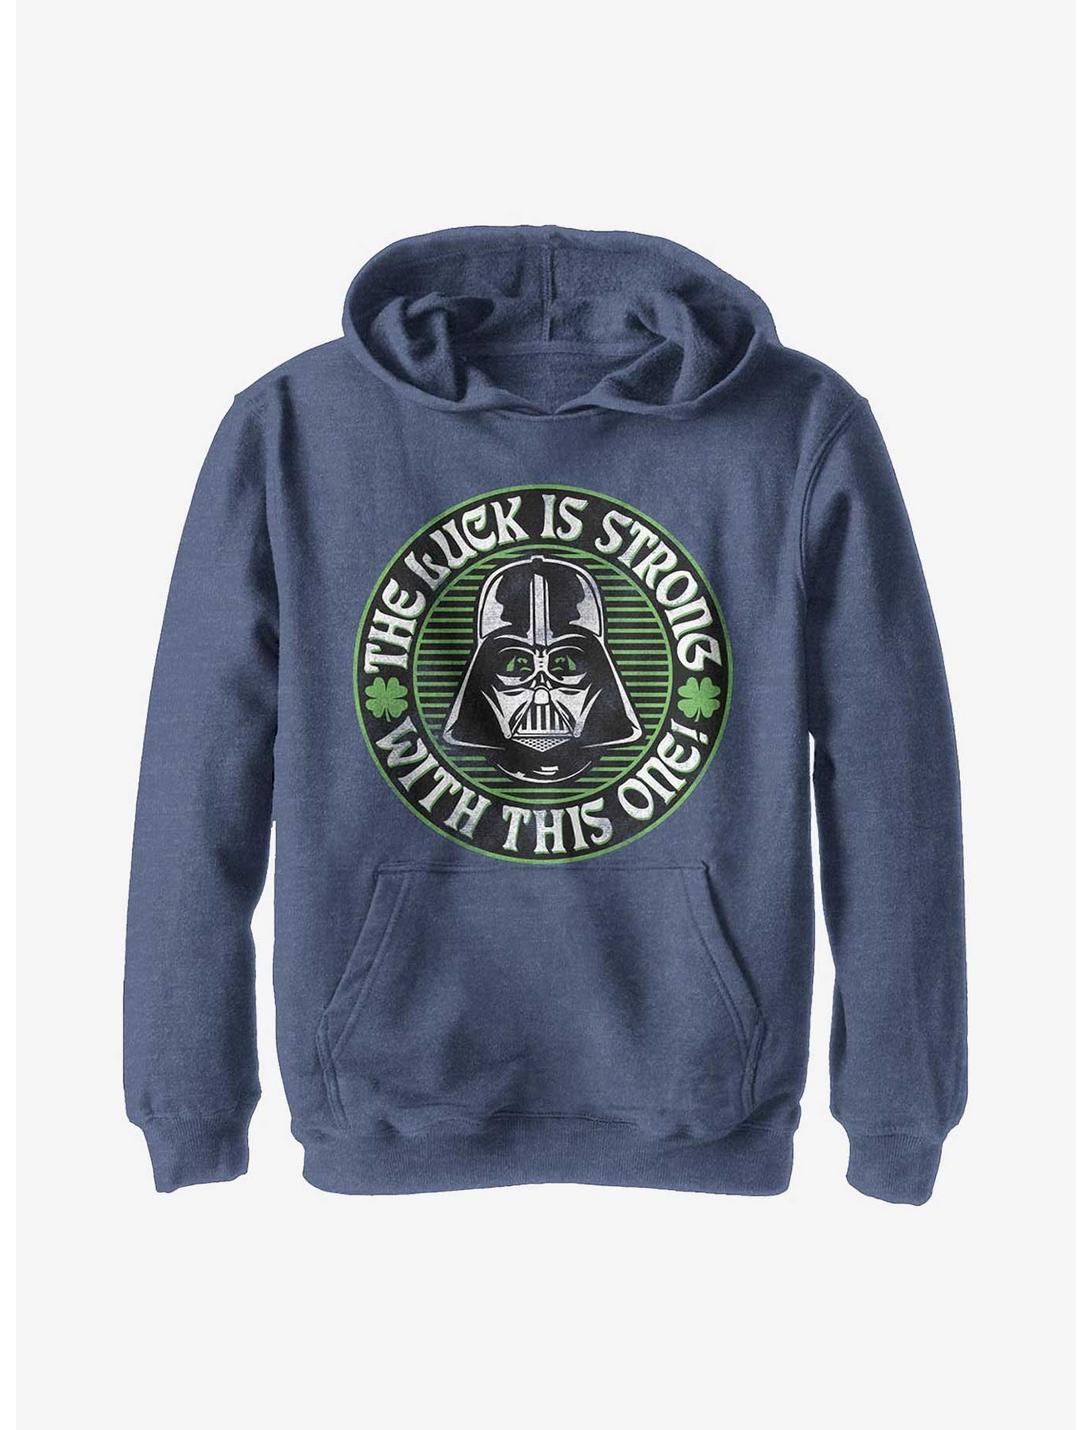 Star Wars Luck Is Strong Youth Hoodie, NAVY HTR, hi-res